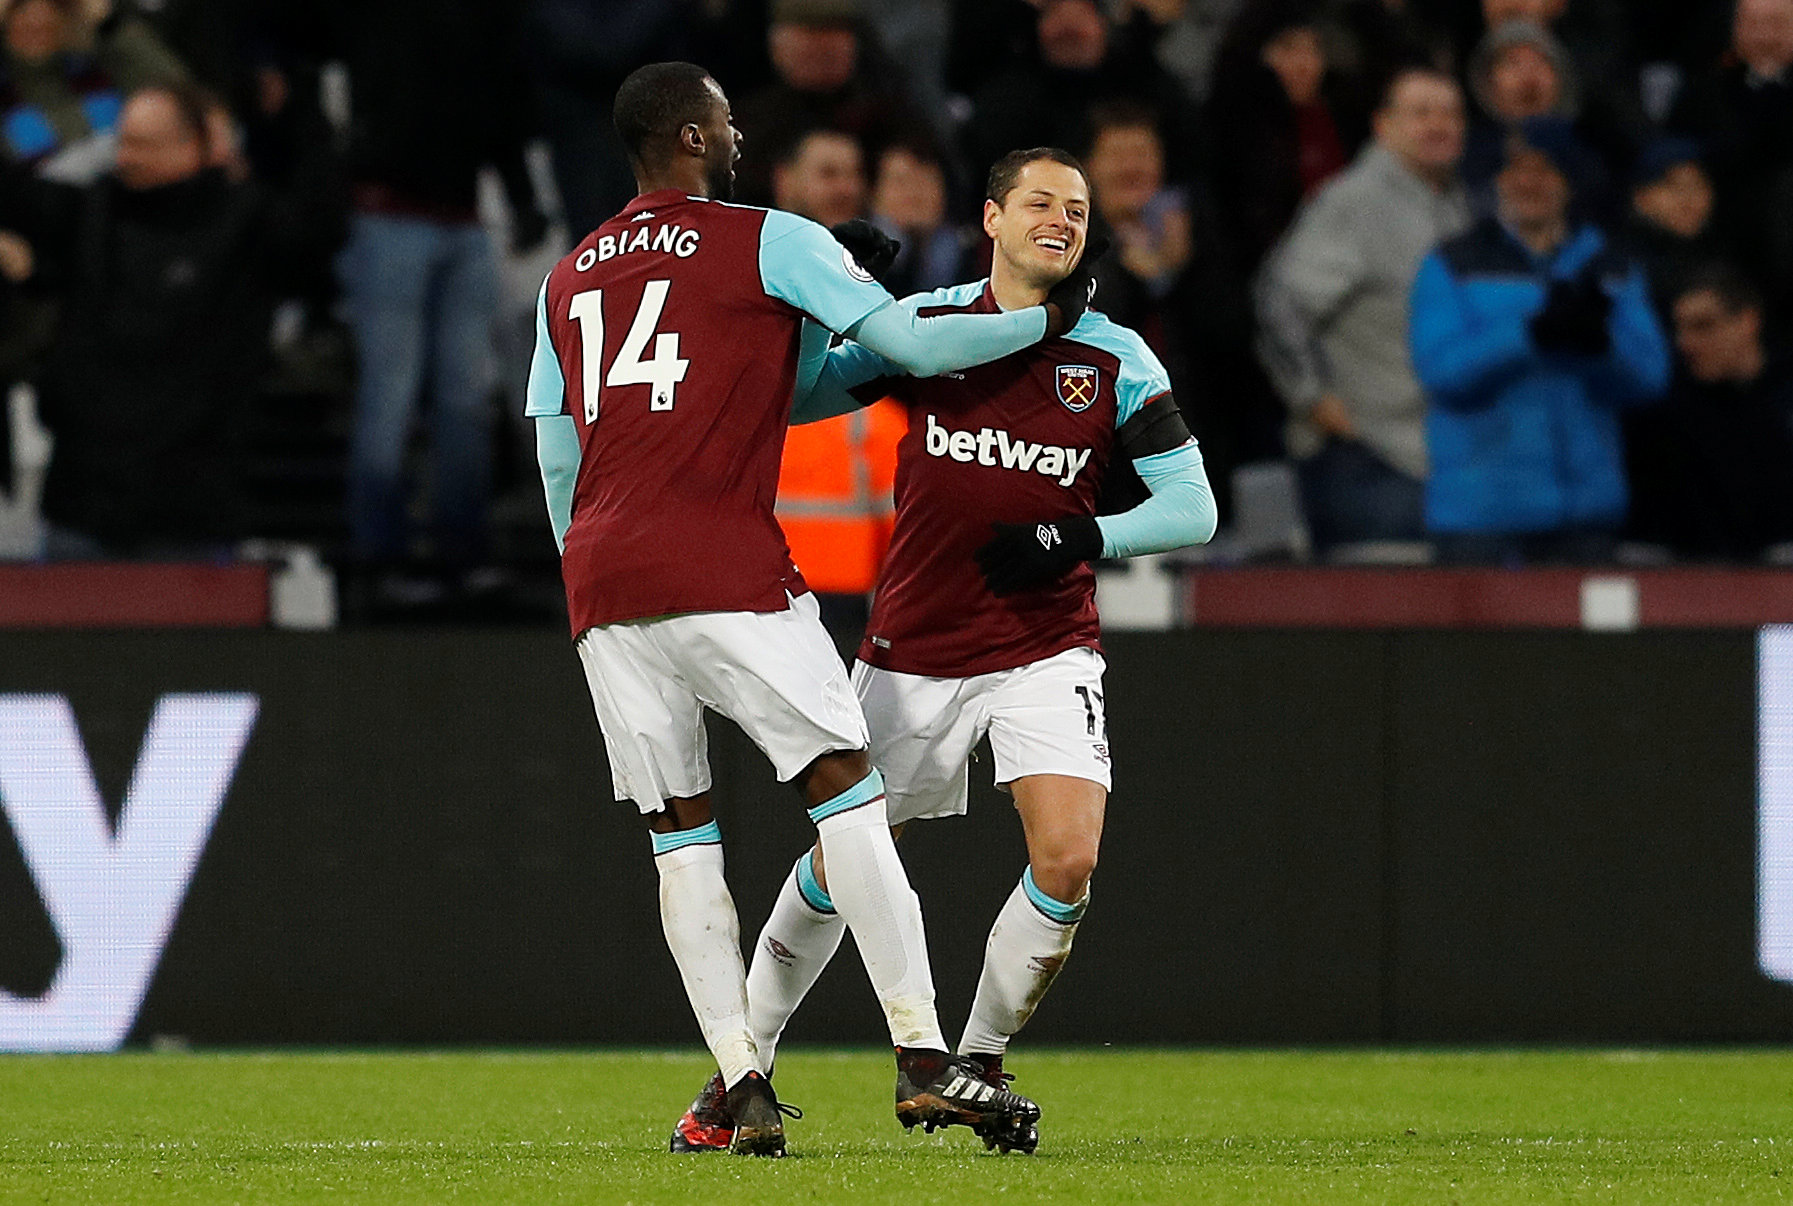 Football: Battling Bournemouth hold West Ham to 1-1 draw